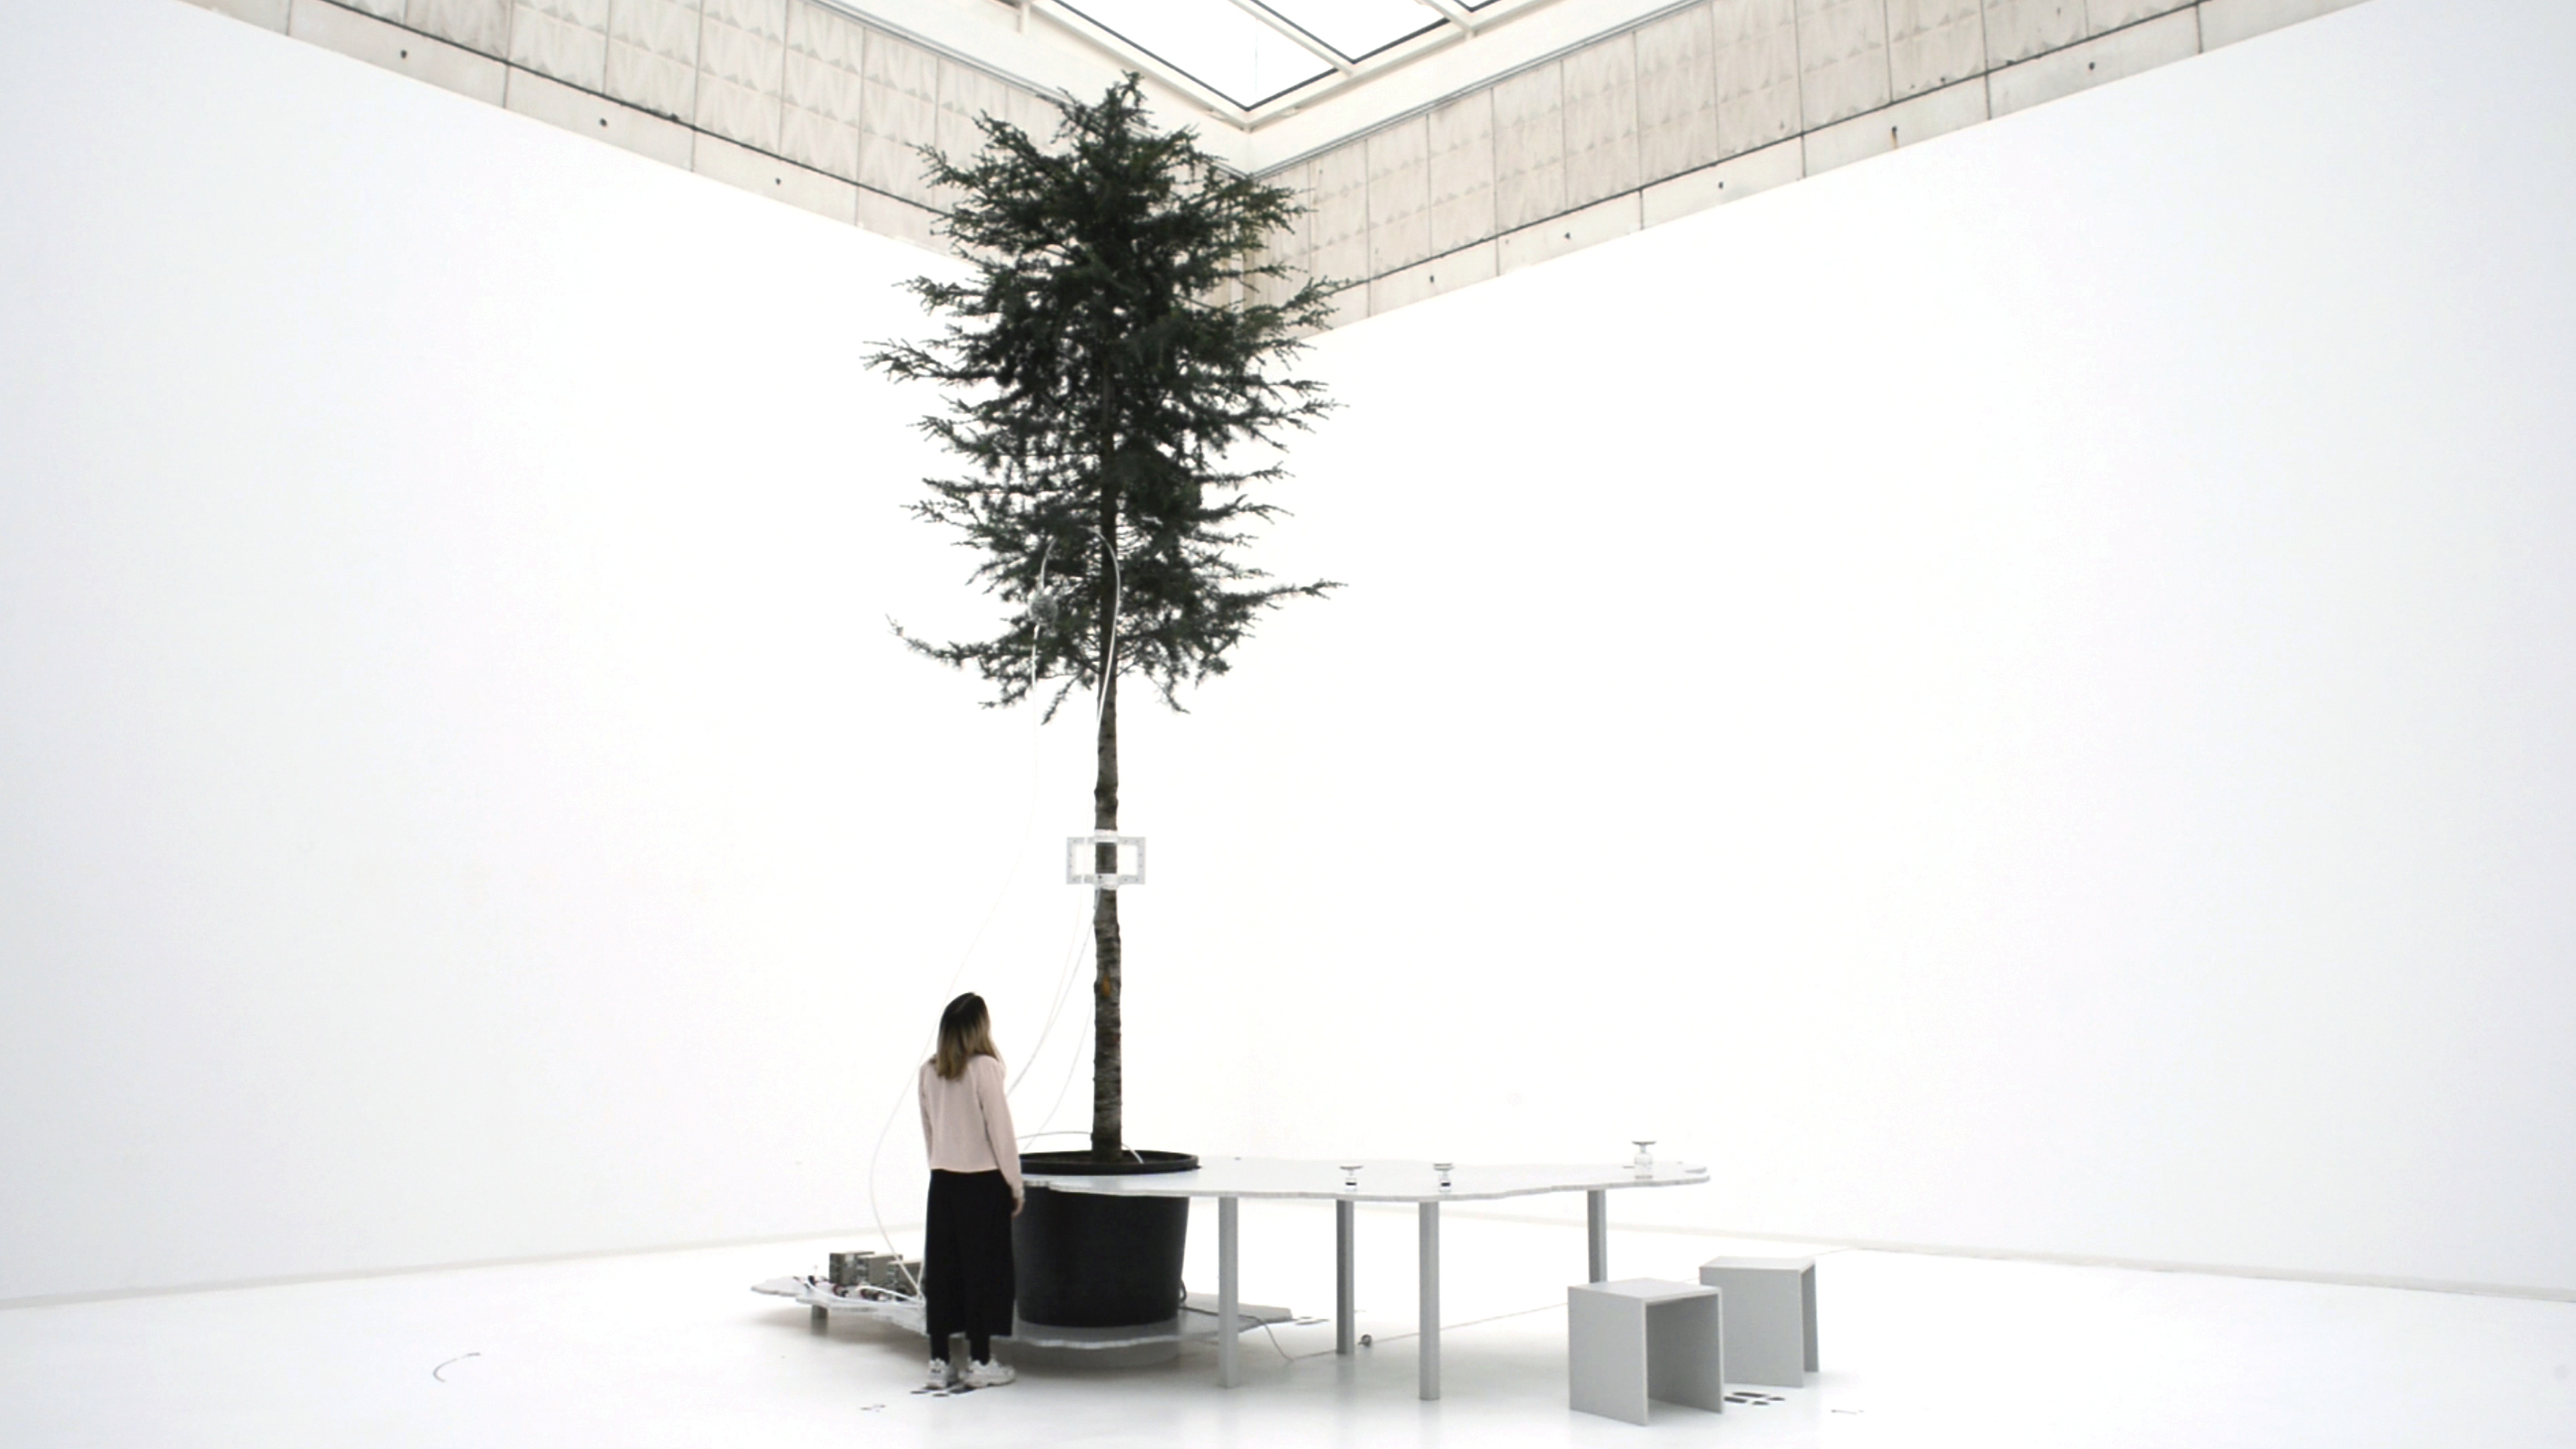 Agnes Meyer-Brandis: One Tree ID - How to become a tree for another tree. 2019. Copyright Agnes Meyer-Brandis. VG Bild-Kunst, Bonn 2019